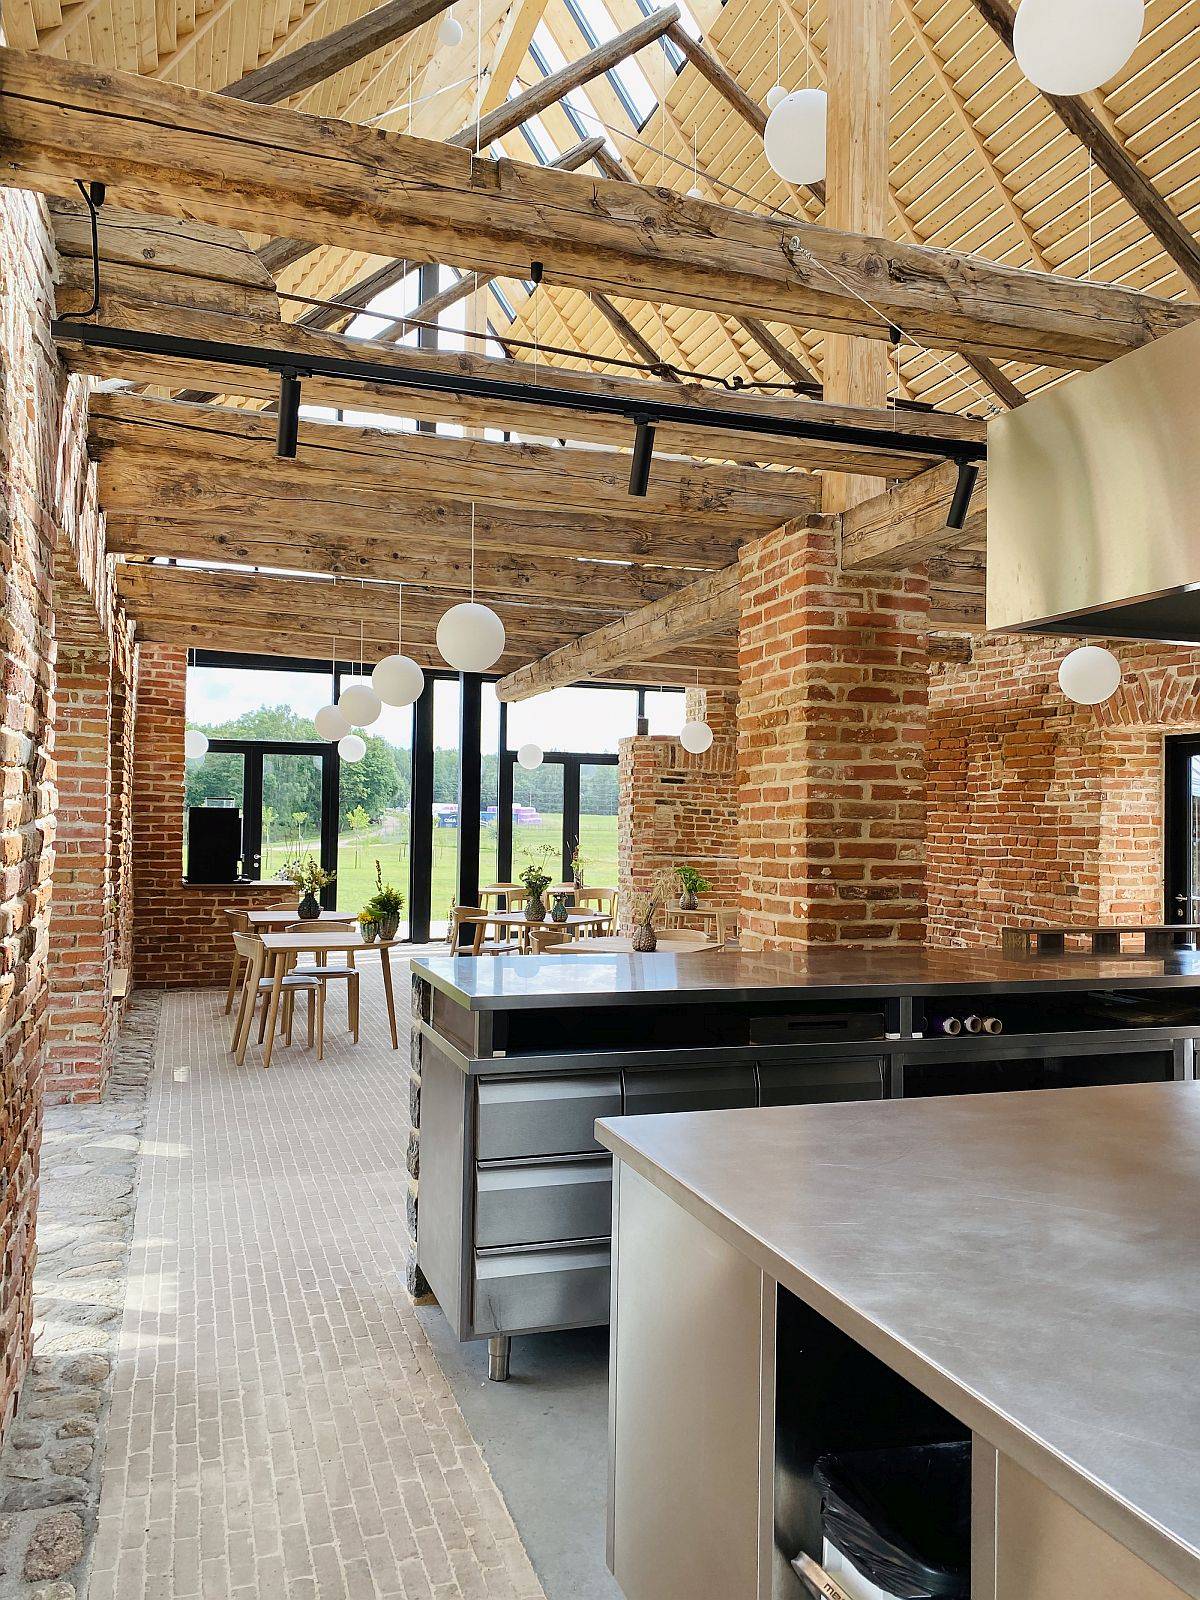 Kitchen-and-dining-area-of-the-interior-with-brick-walls-and-rustic-industrial-design-90833